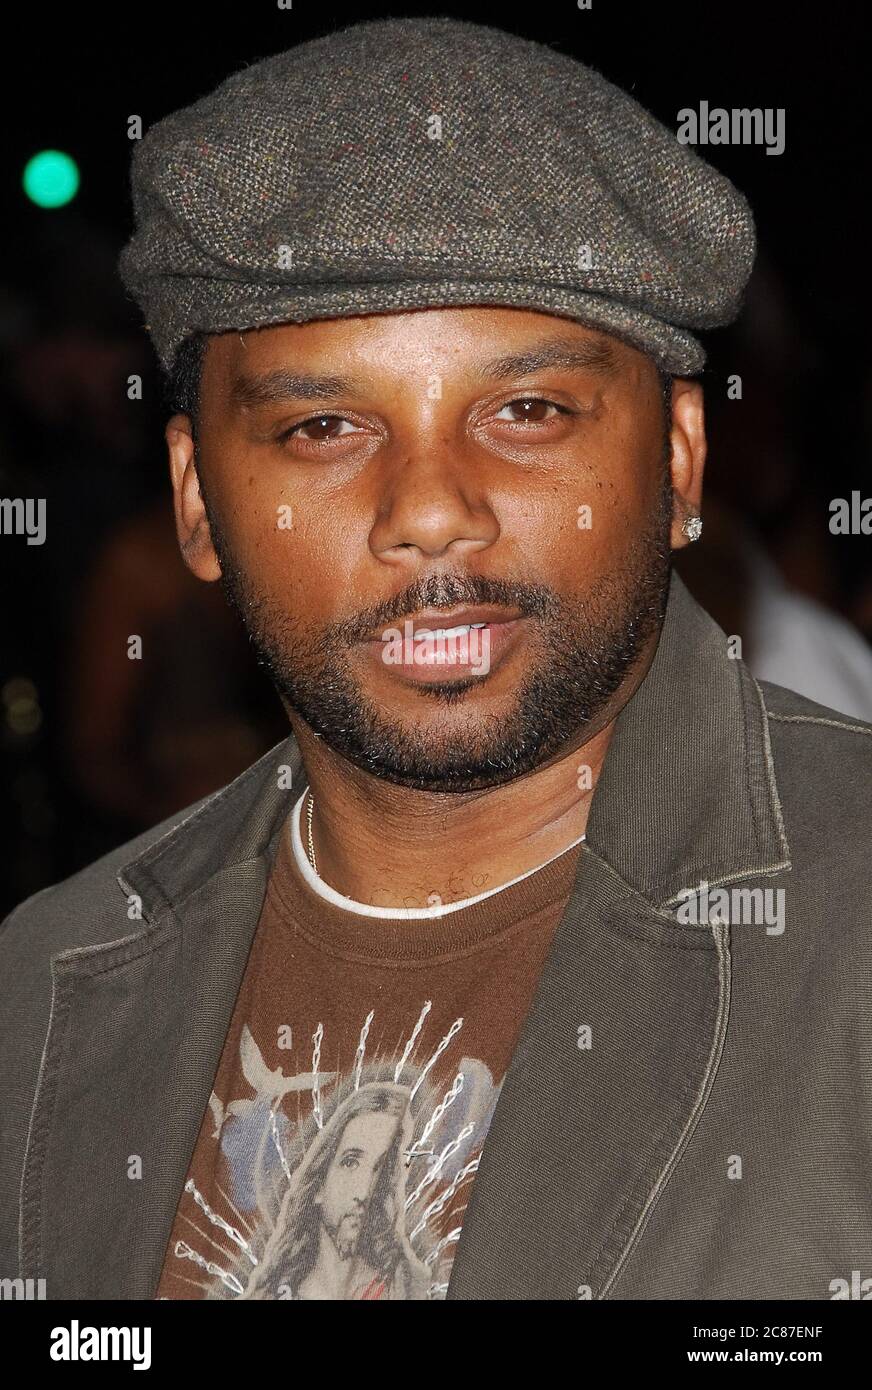 Carl Payne at the Premiere of 'Somebody Help Me' held at the Grauman's Chinese Theater in Hollywood, CA. The event took place on Thursday, October25, 2007. Photo by: SBM / PictureLux- File Reference # 34006-9600SBMPLX Stock Photo